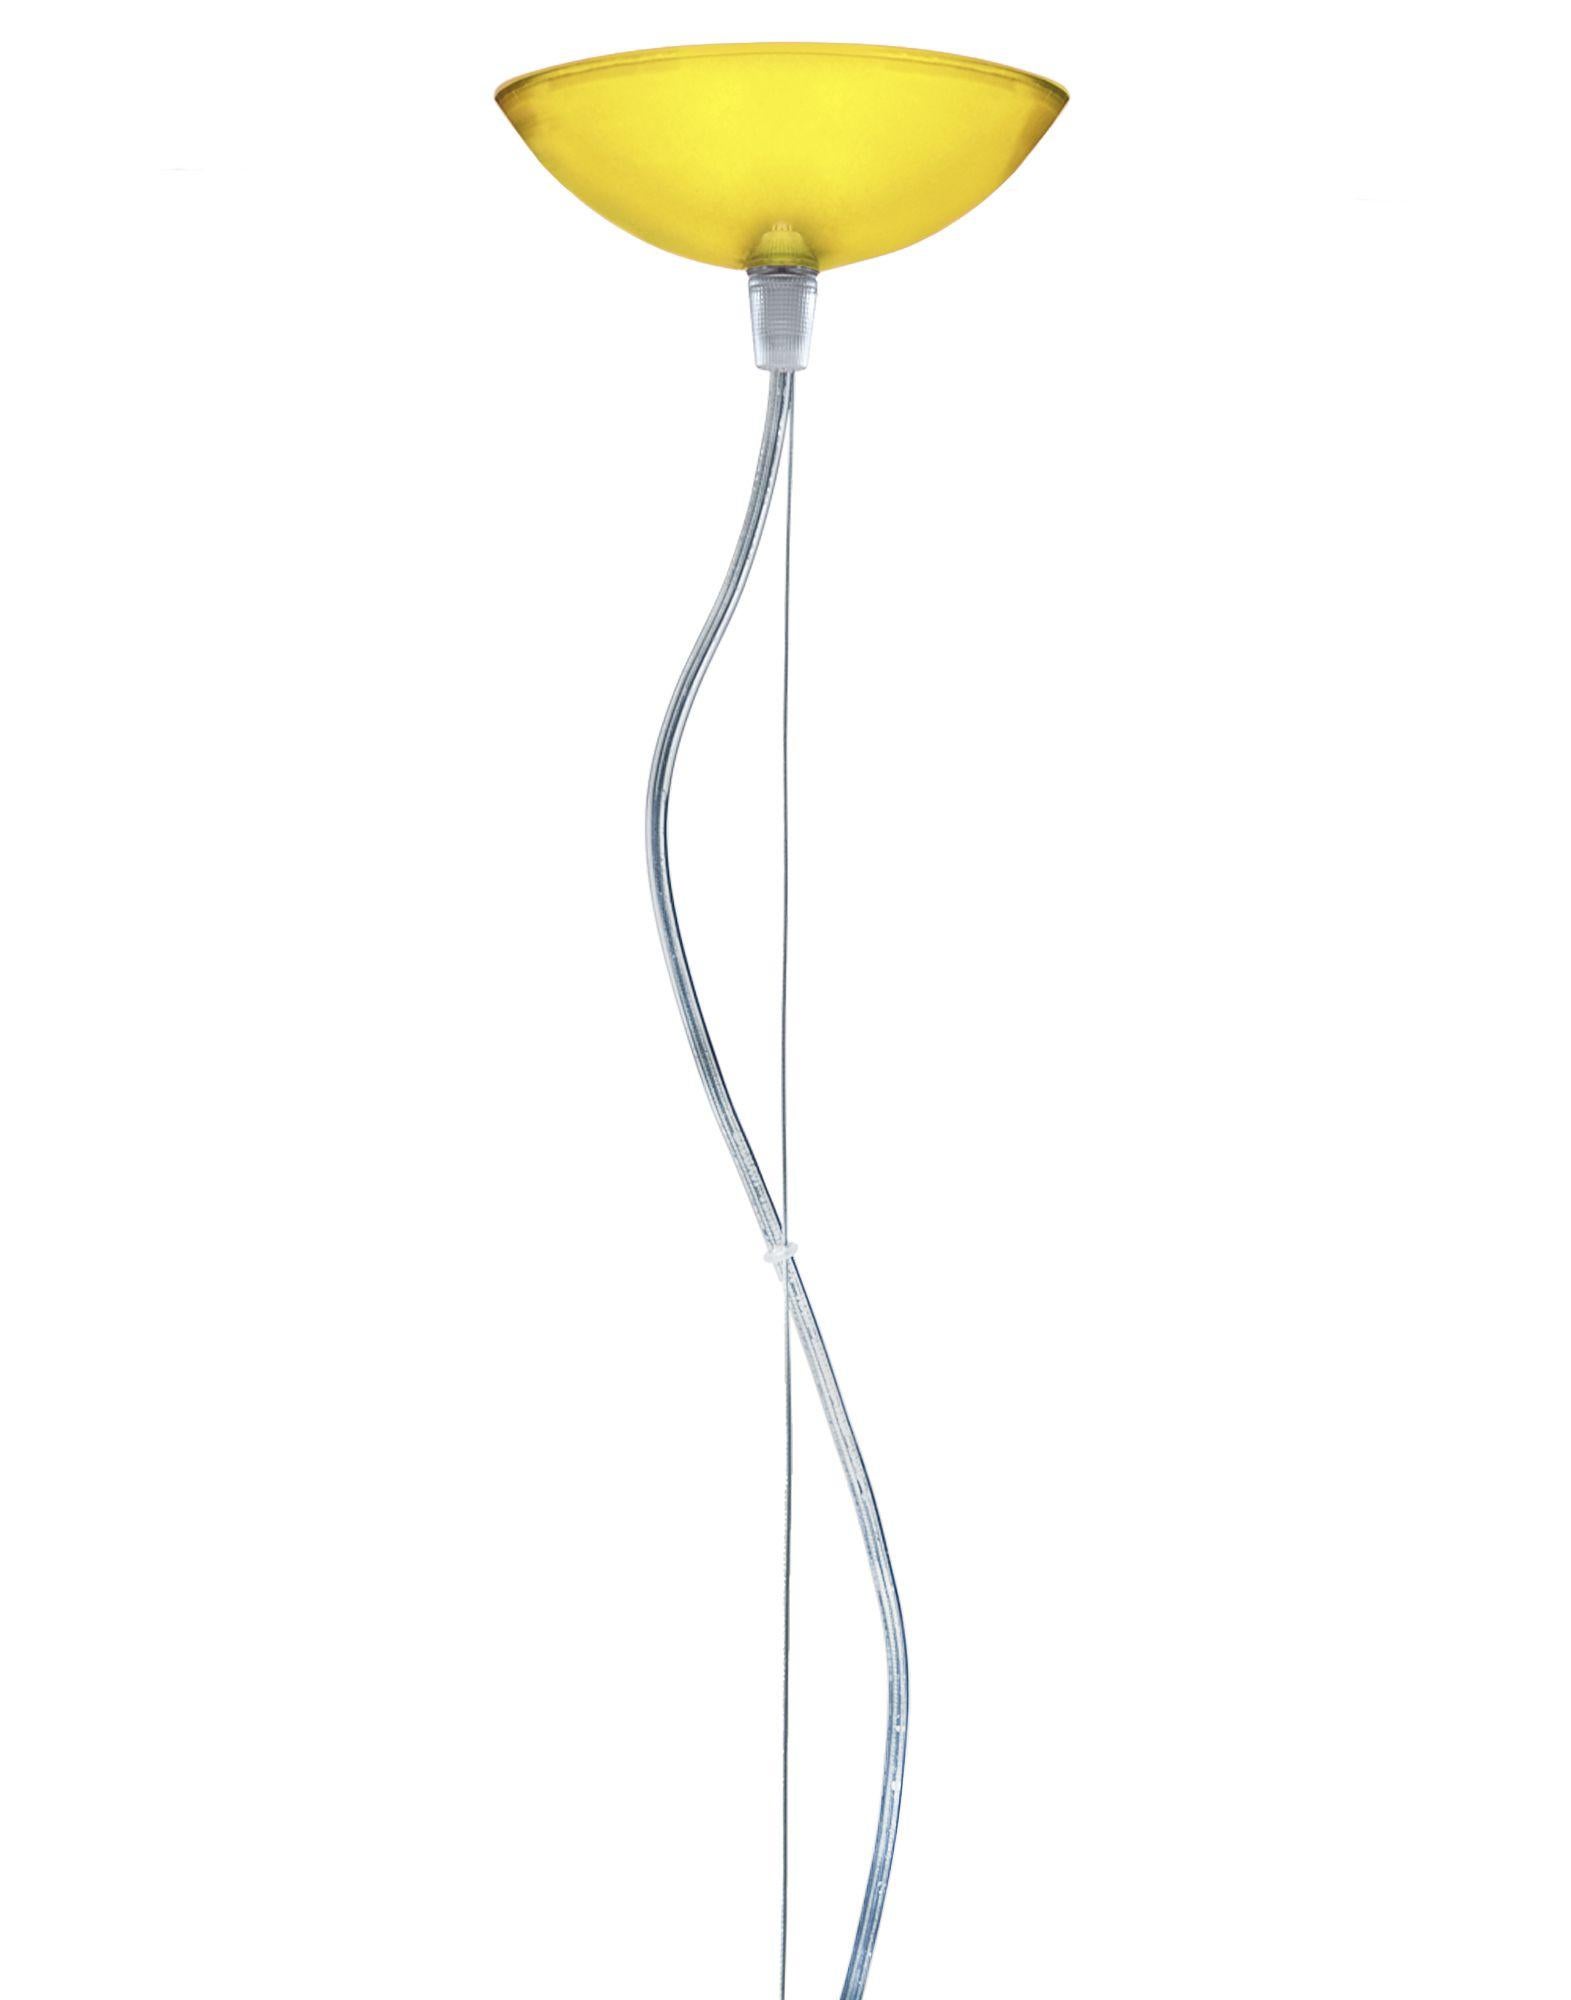 FL/Y pendant light small in yellow. It is a collection of pendant lamps designed by Ferruccio Laviani in 2002.

Dimensions: Shade height: 11 in.; Diameter: 15 in.; Unit weight: 1.08 kg. Made of: PMMA. Assembly required. Voltage: 120. Cord length